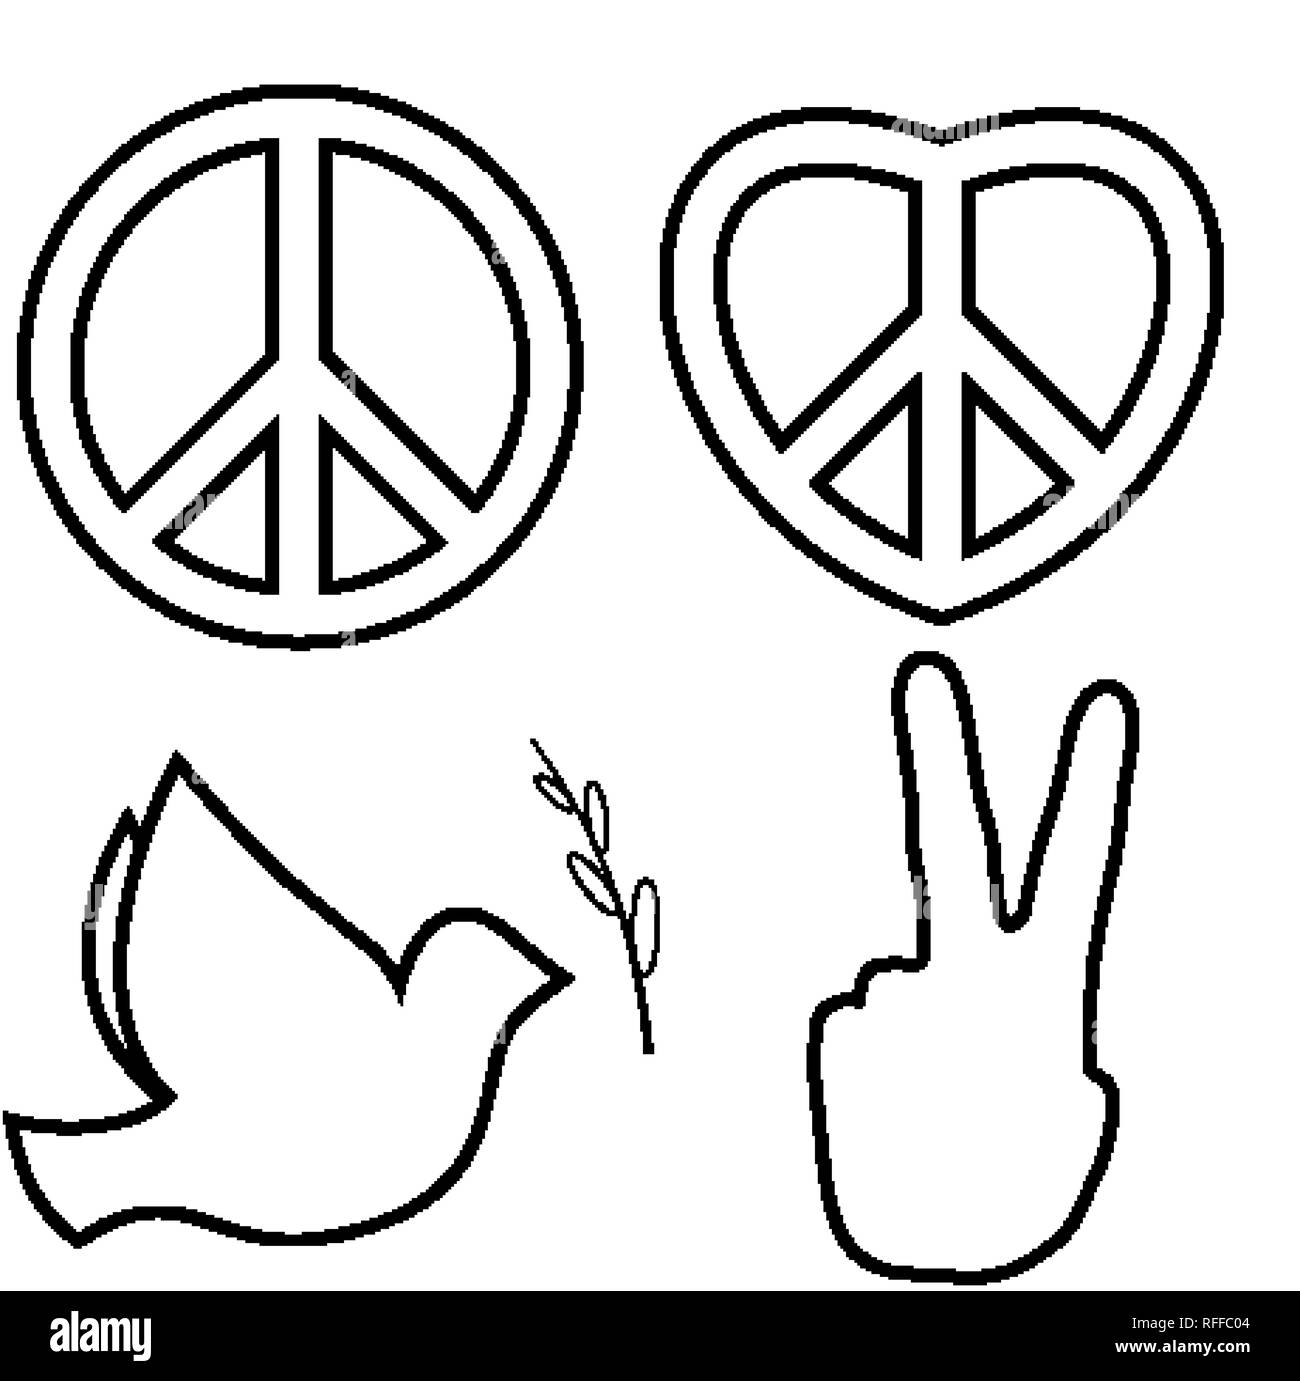 Outlined hippie peace sign. Line icons set Stock Vector